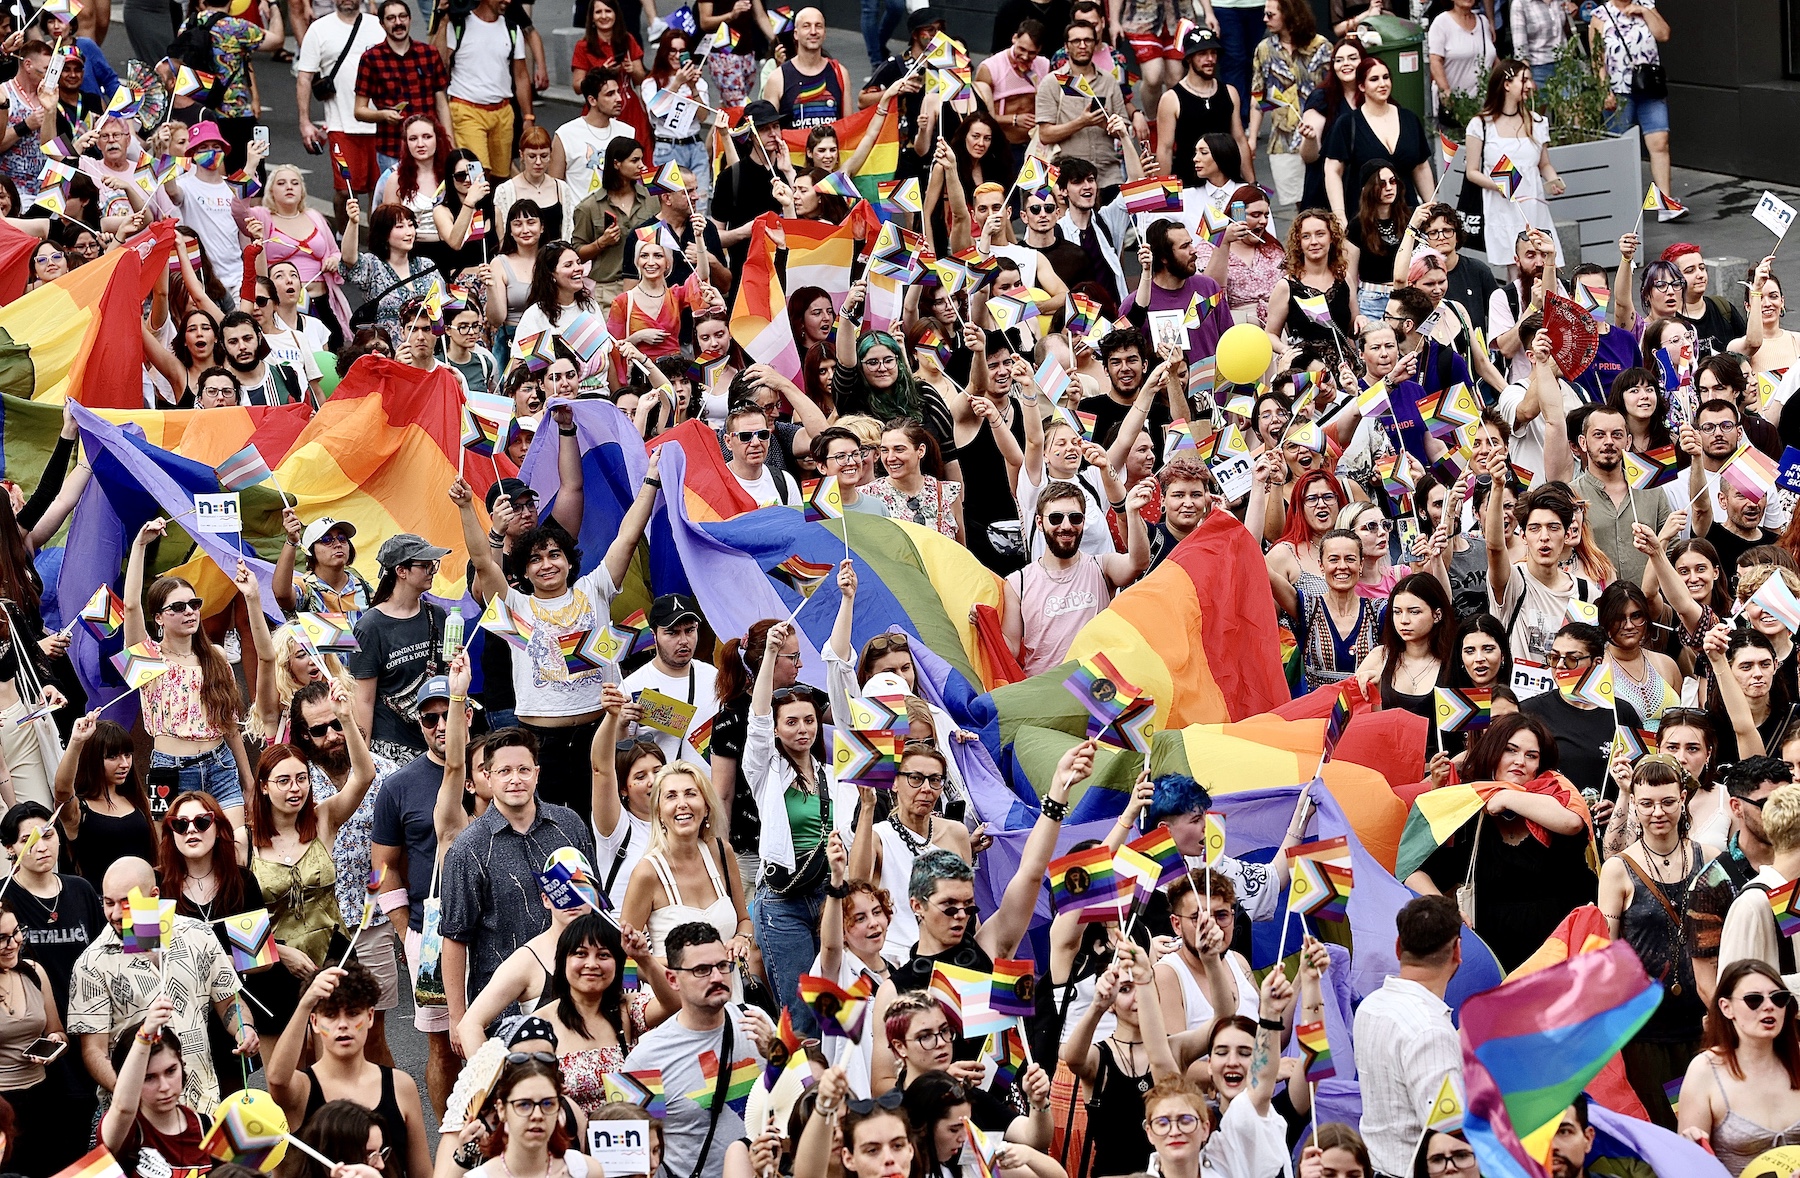 Thousands of people gather around for Romania's LGBTQ Pride march